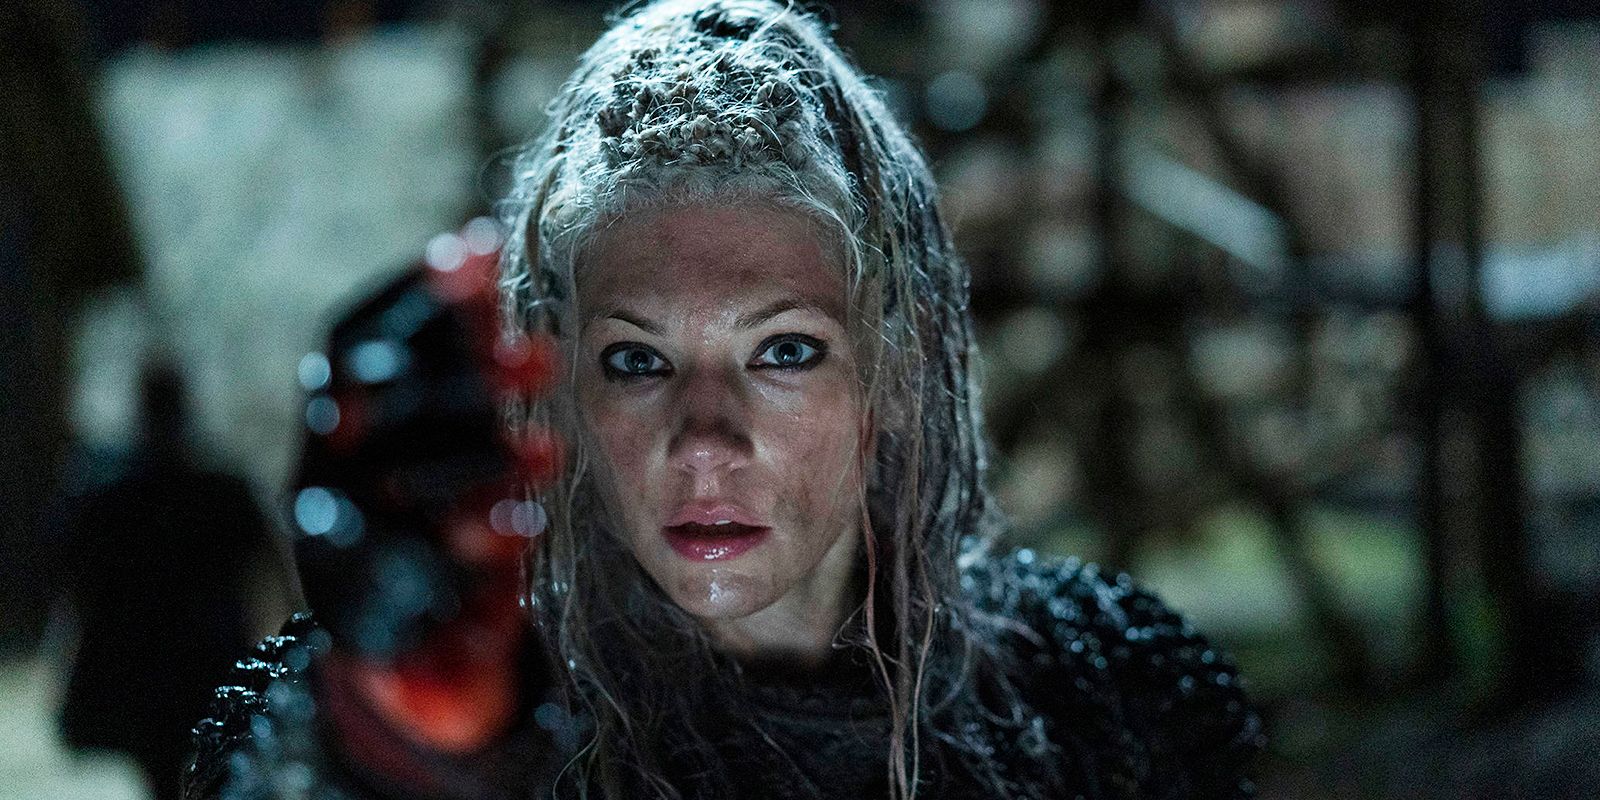 Vikings Lagertha just before her death